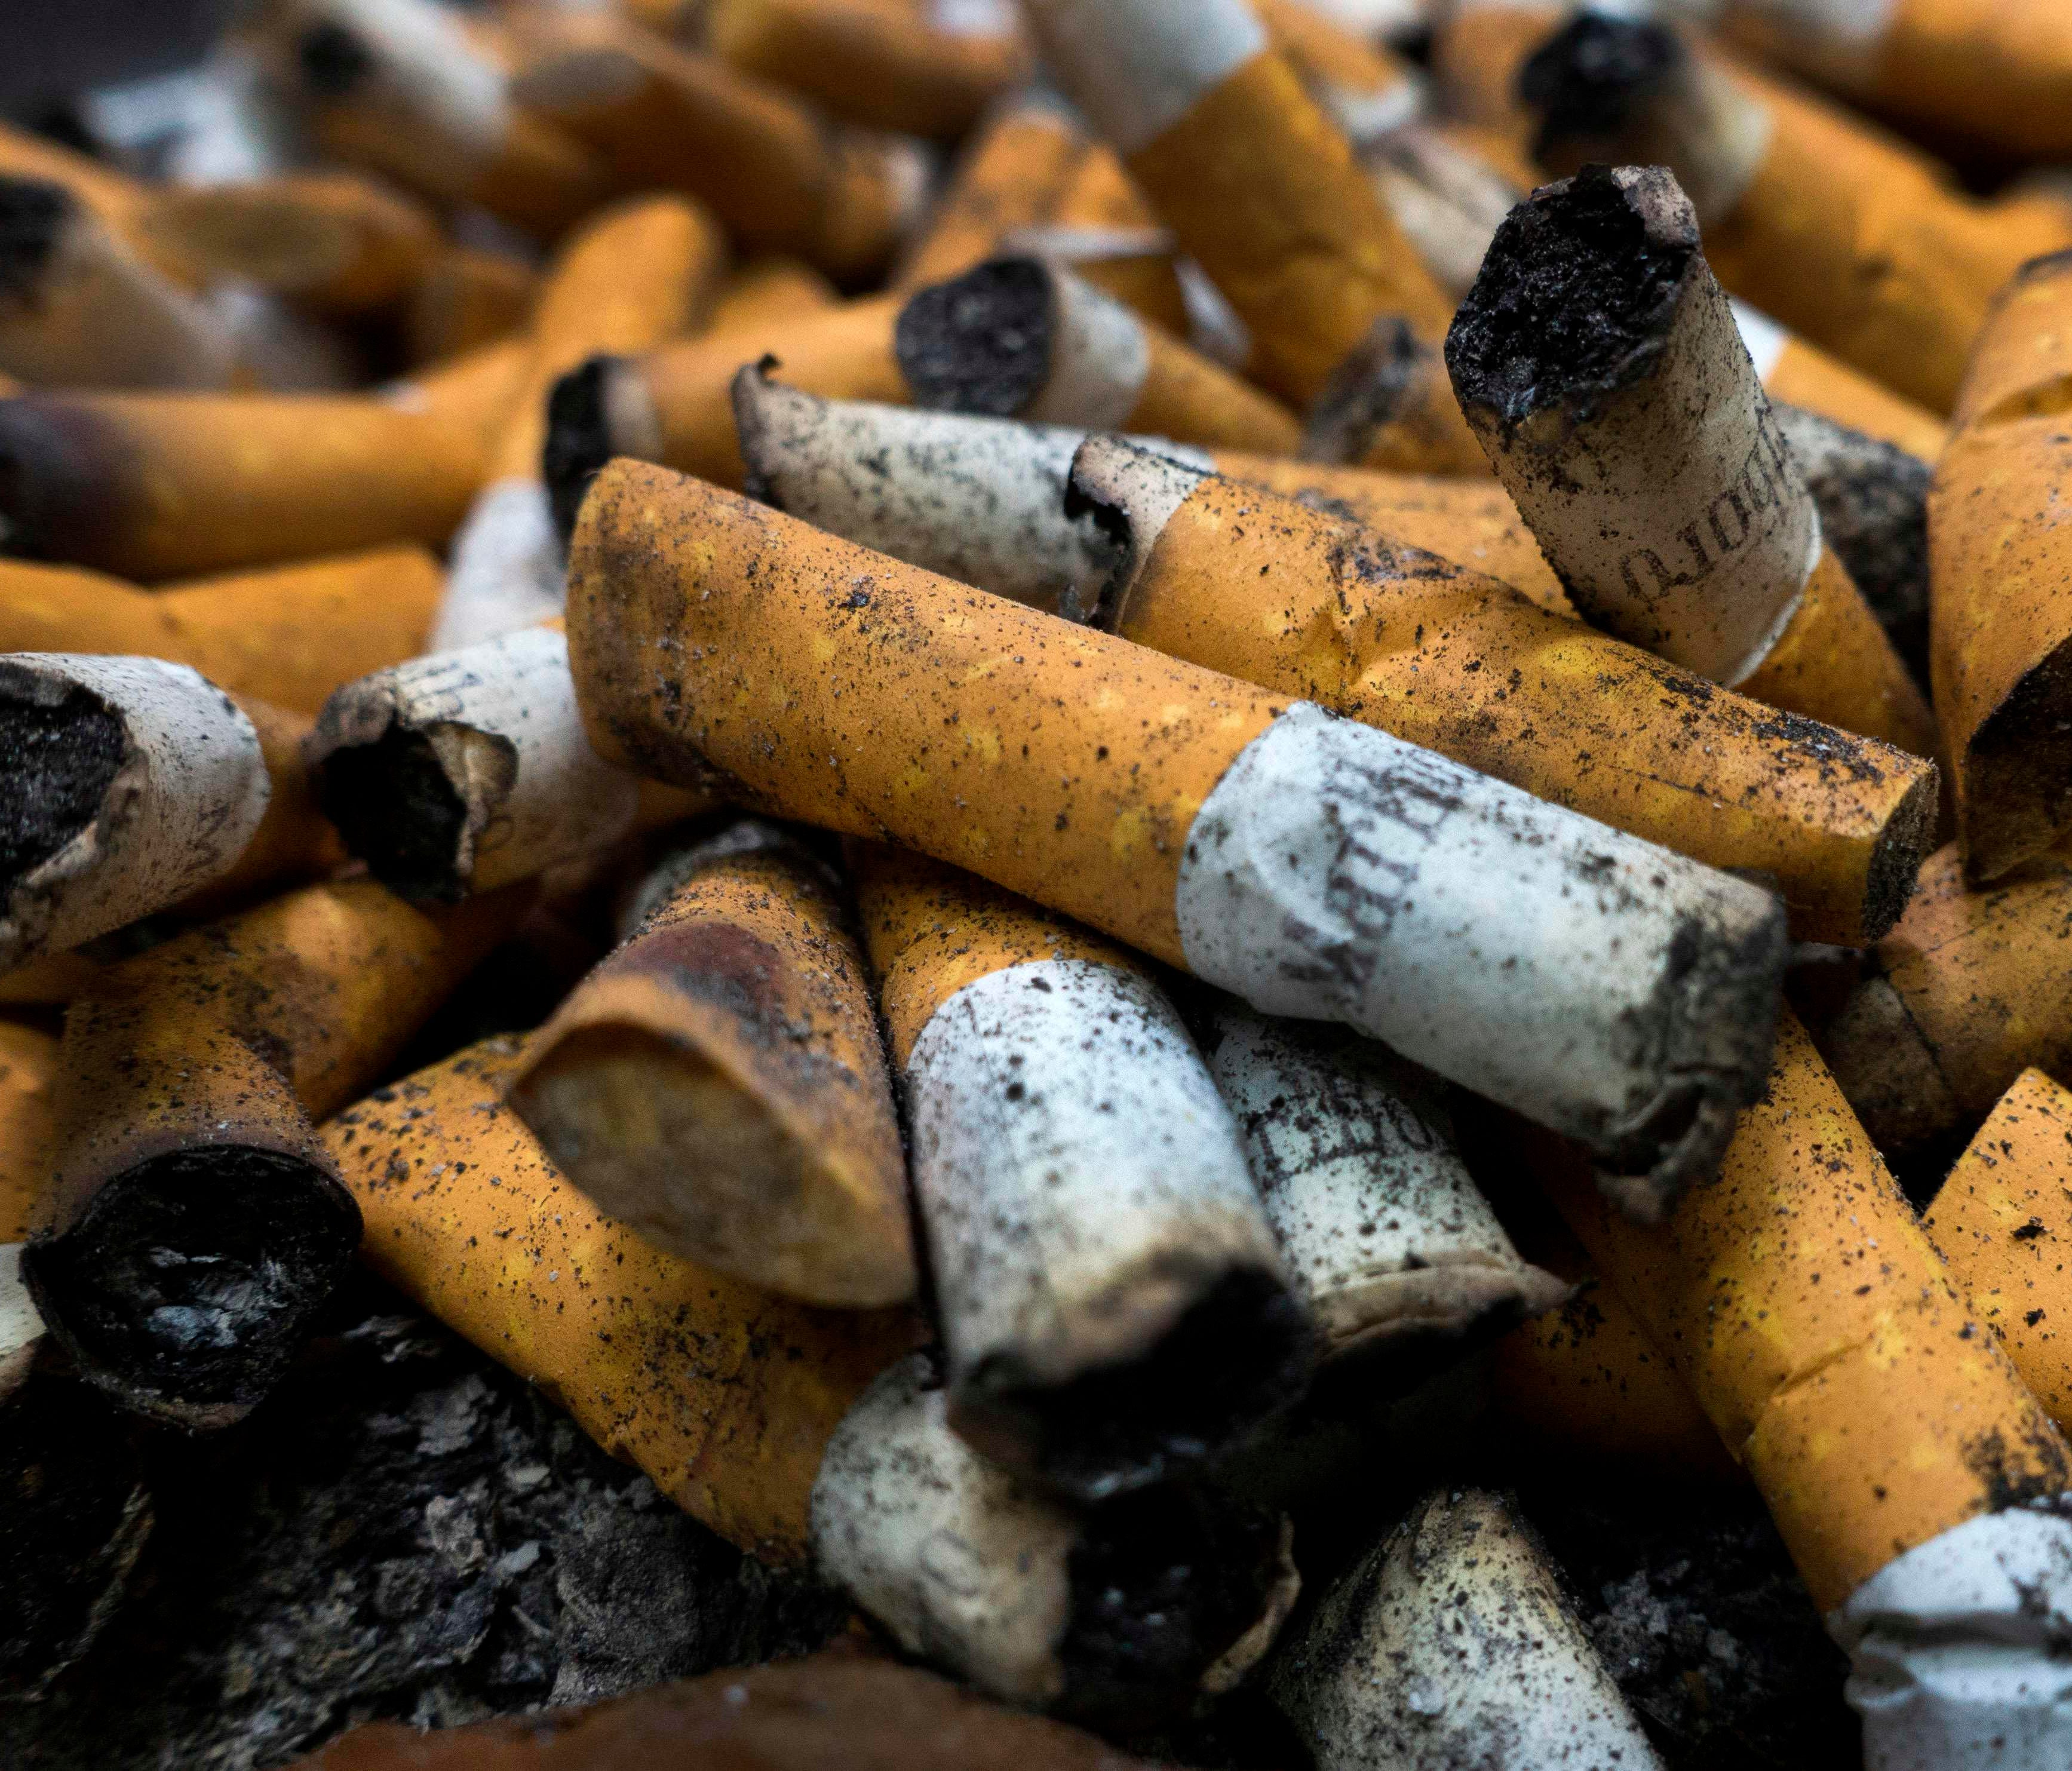 Smoked cigarettes are seen in an ashtray in Centreville, Virginia. Just 13.9 percent of the U.S. population smokes cigarettes, according to a U.S. government report.